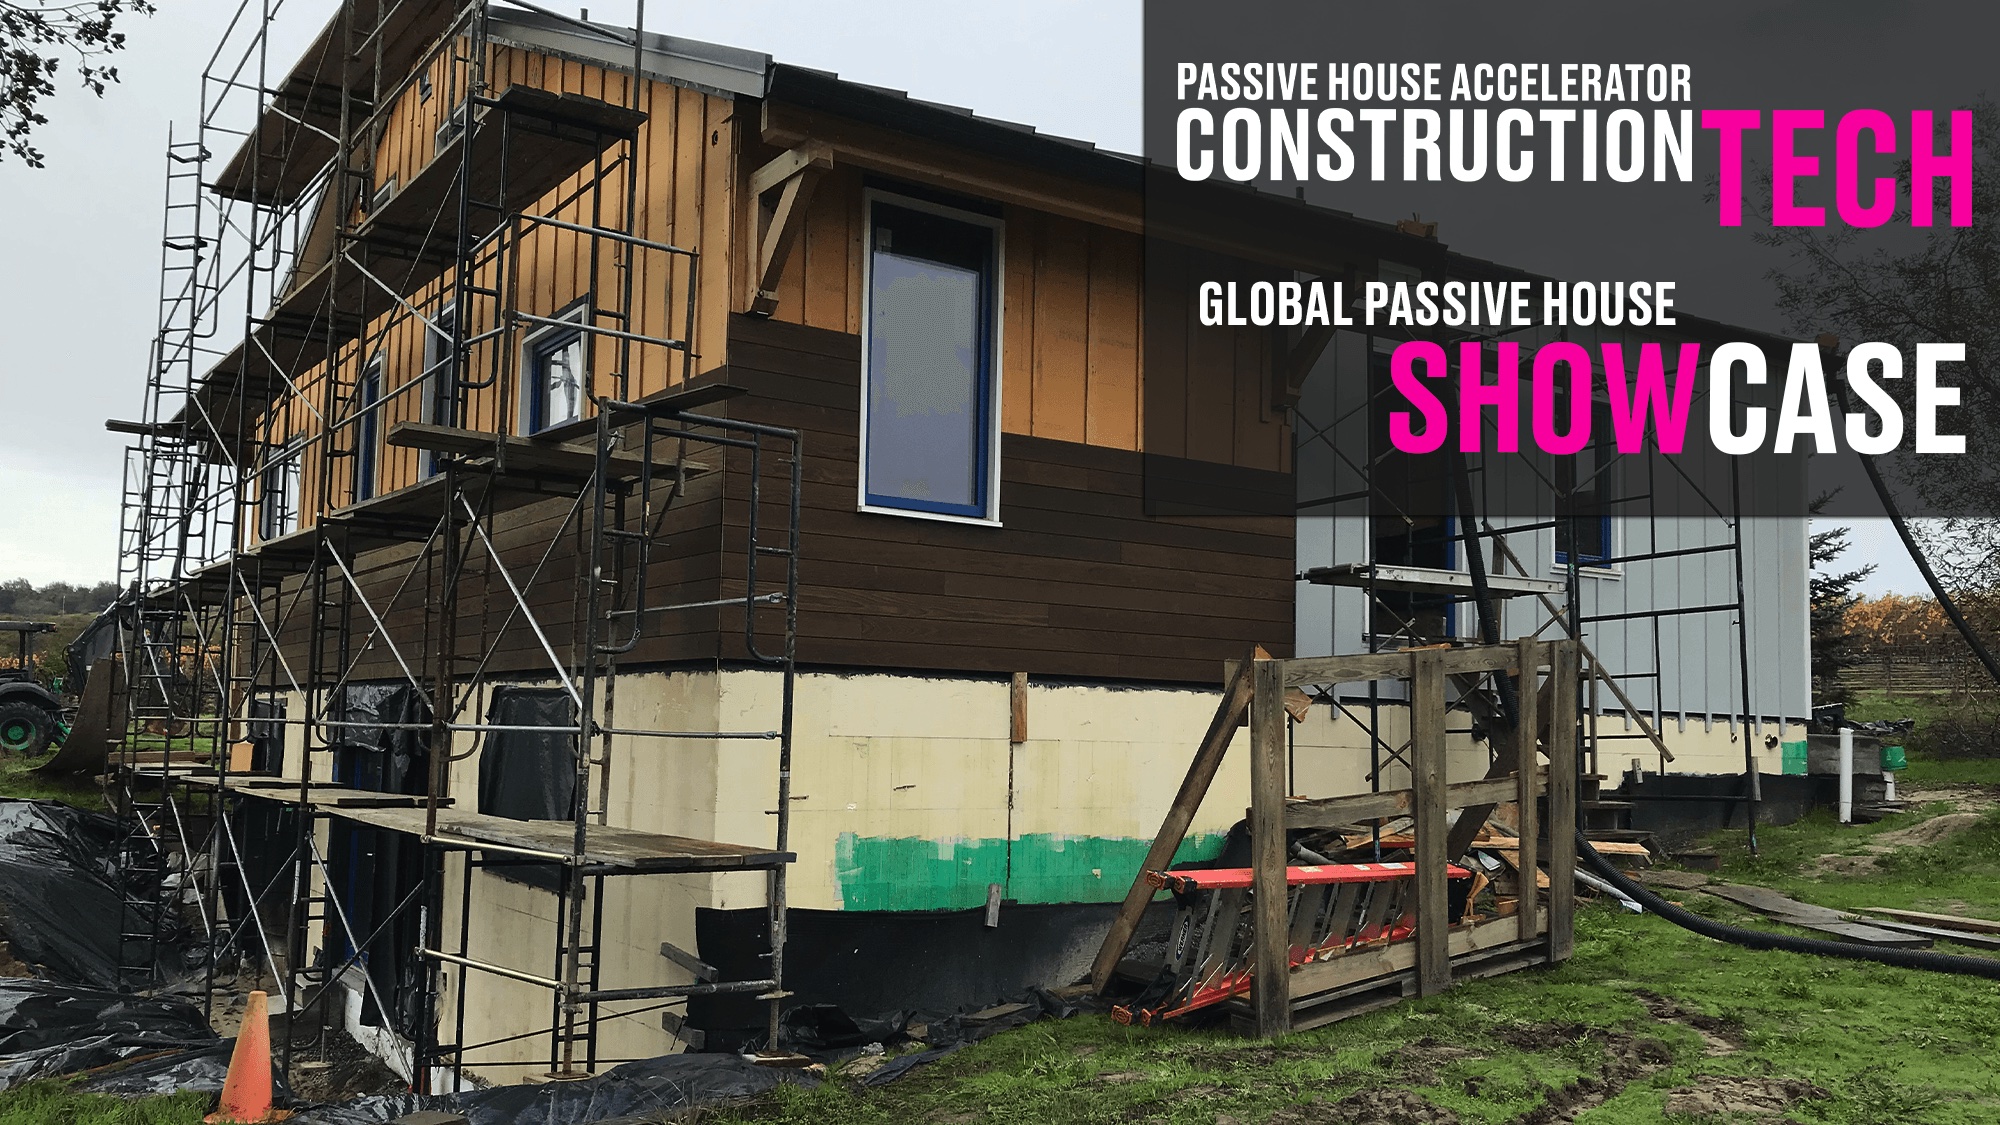 December Lineup for Construction Tech and Global Passive House Showcase